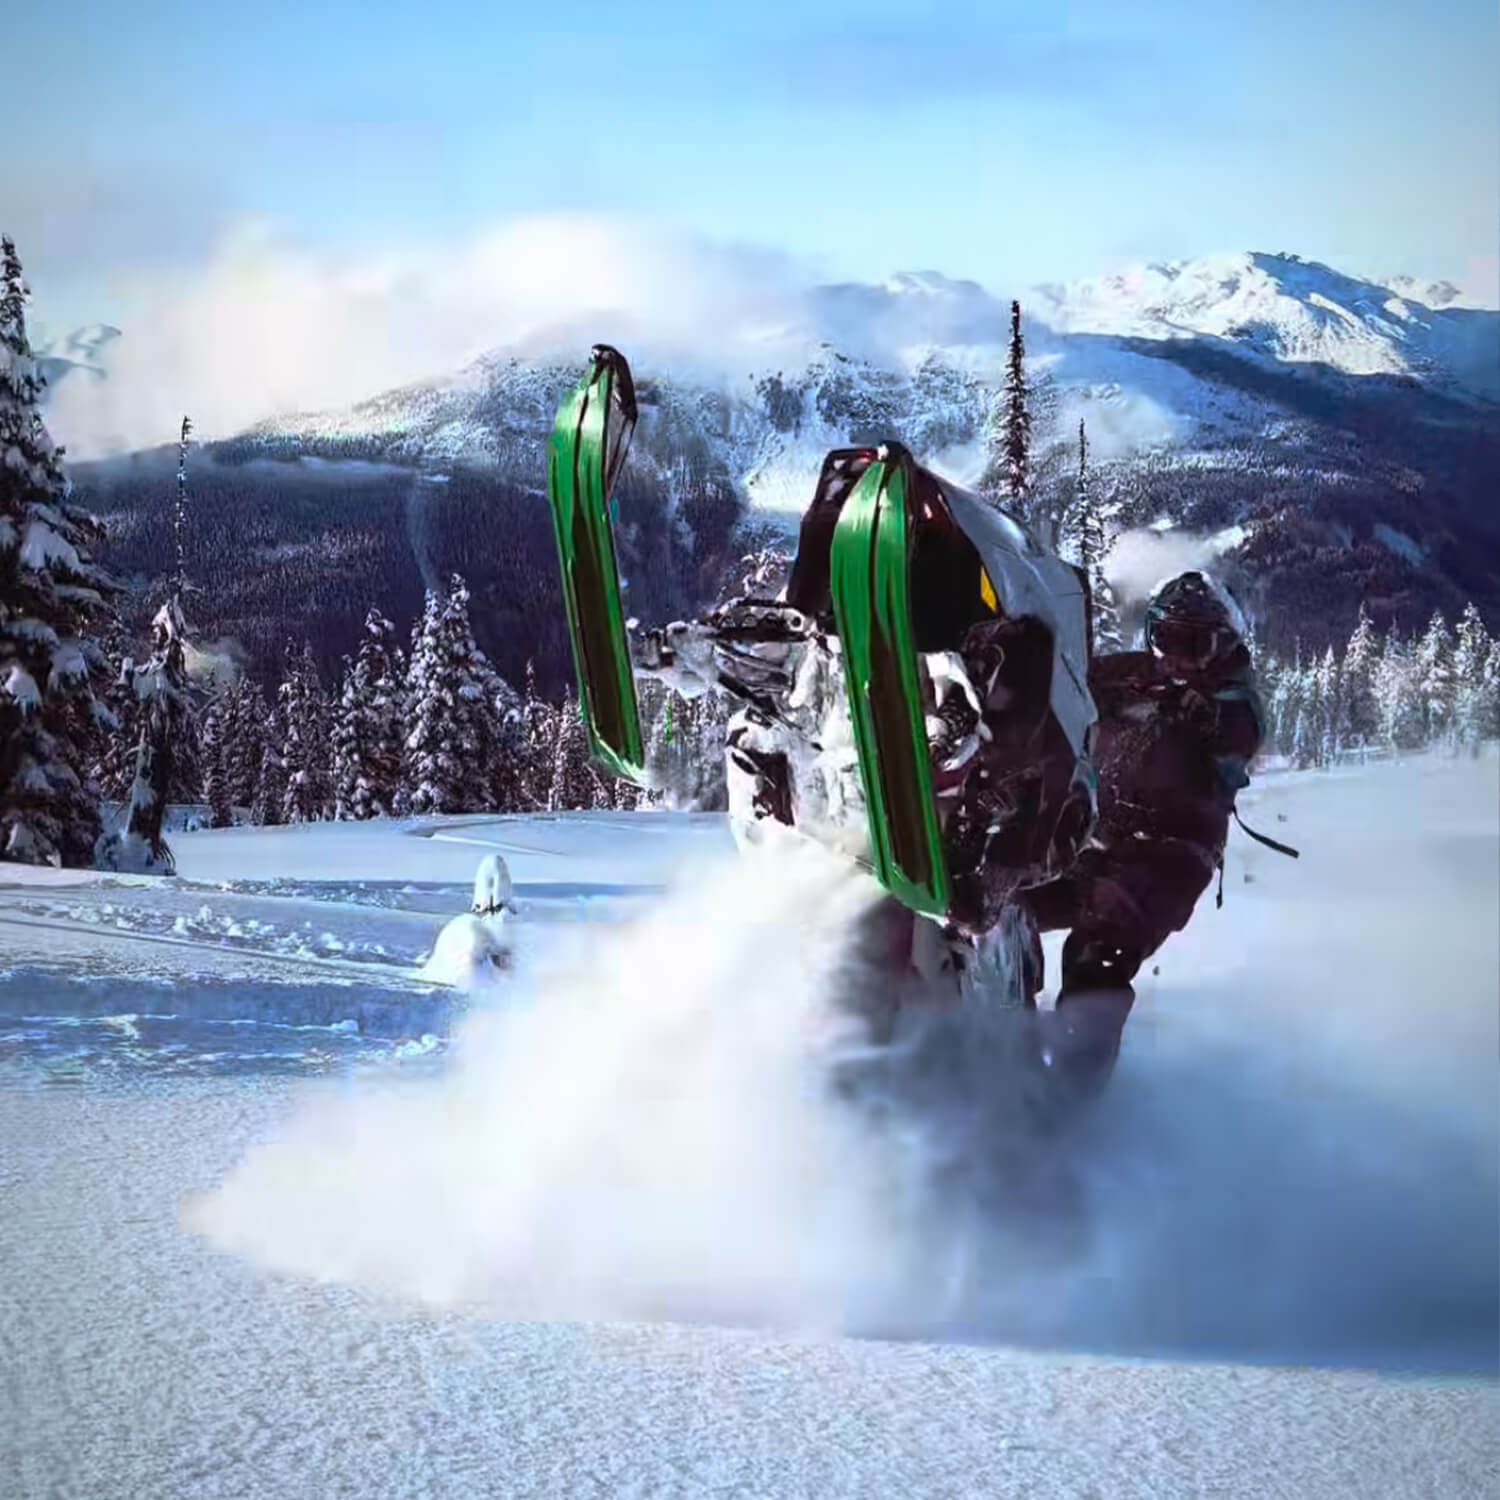 Professional backcountry snowmobiler Andy Messner doing a wheelie on a snowmobile with green C&A Pro skis